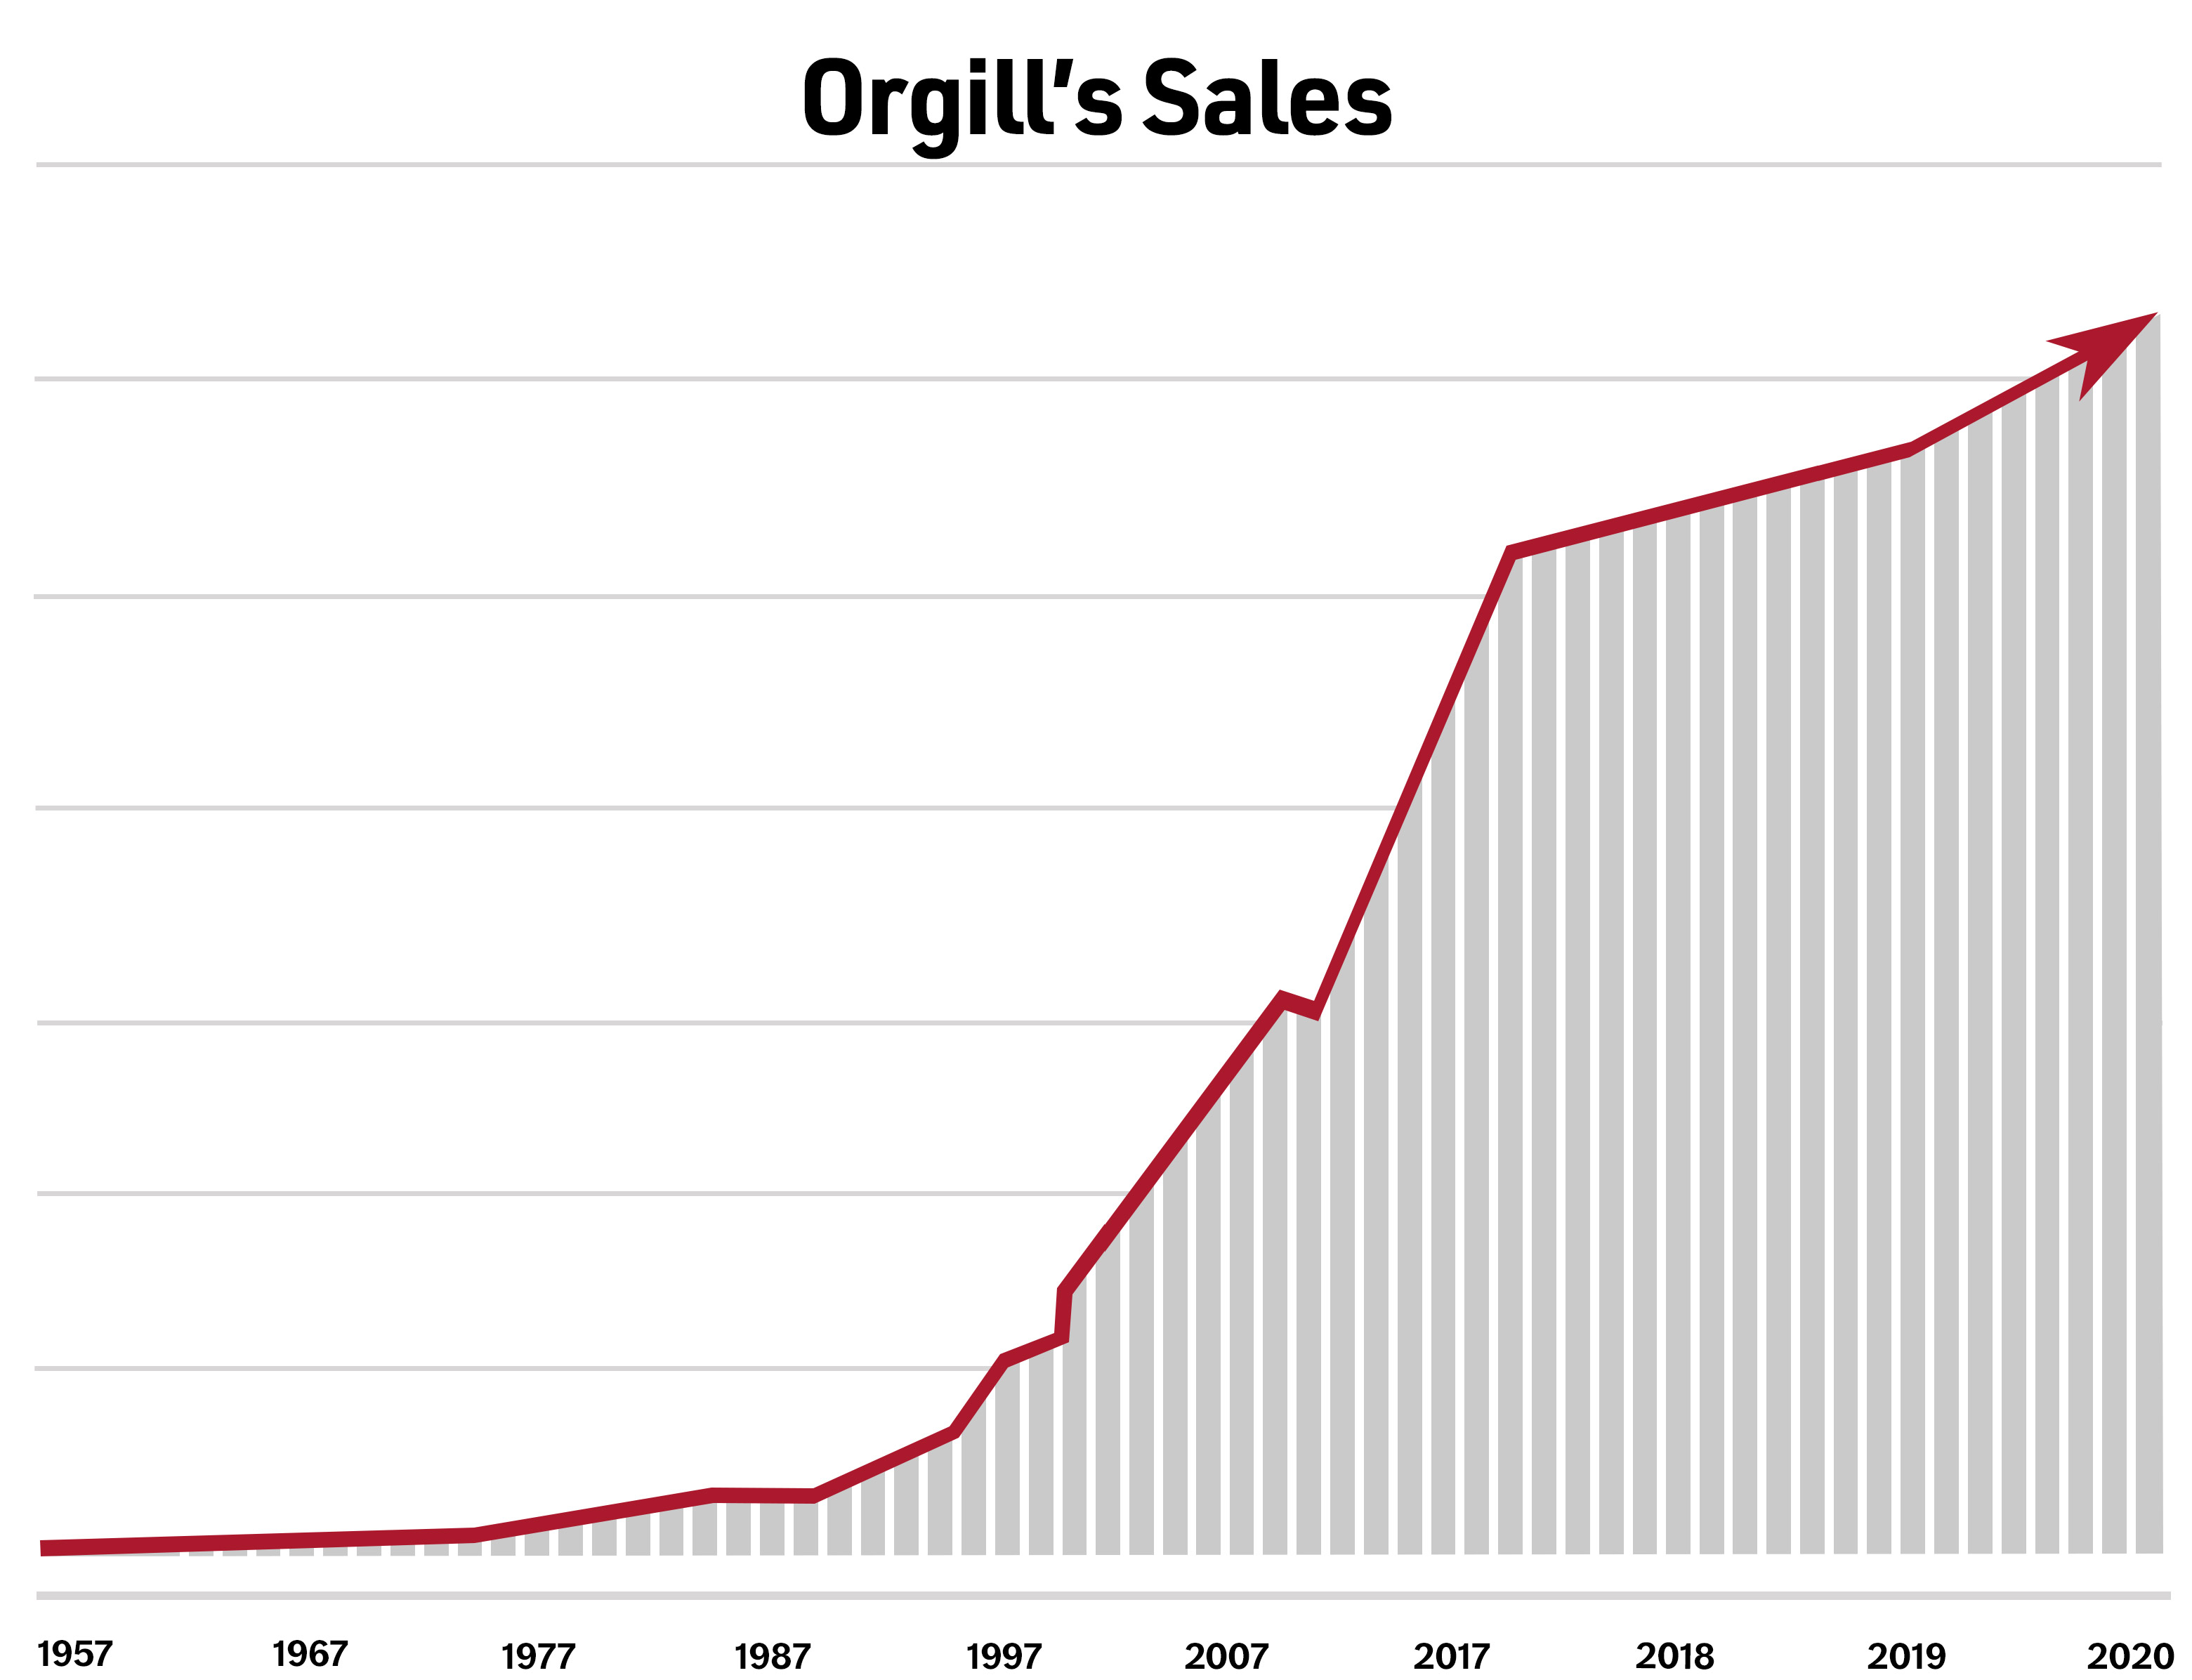 Why Orgill is the Fastest Growing Distributor